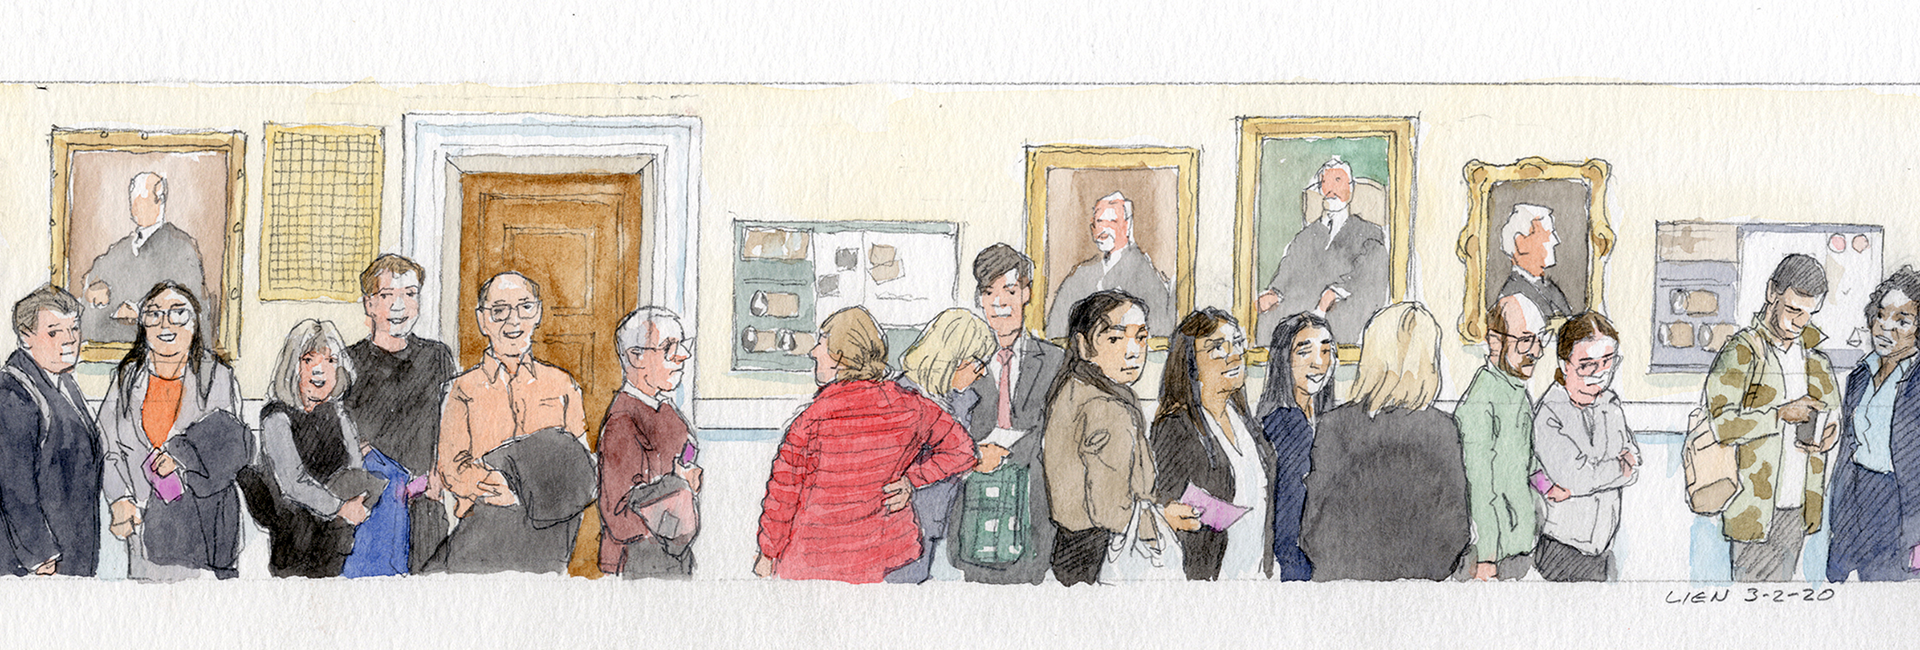 Drawing of people gathered in the hallways of the Supreme Court building